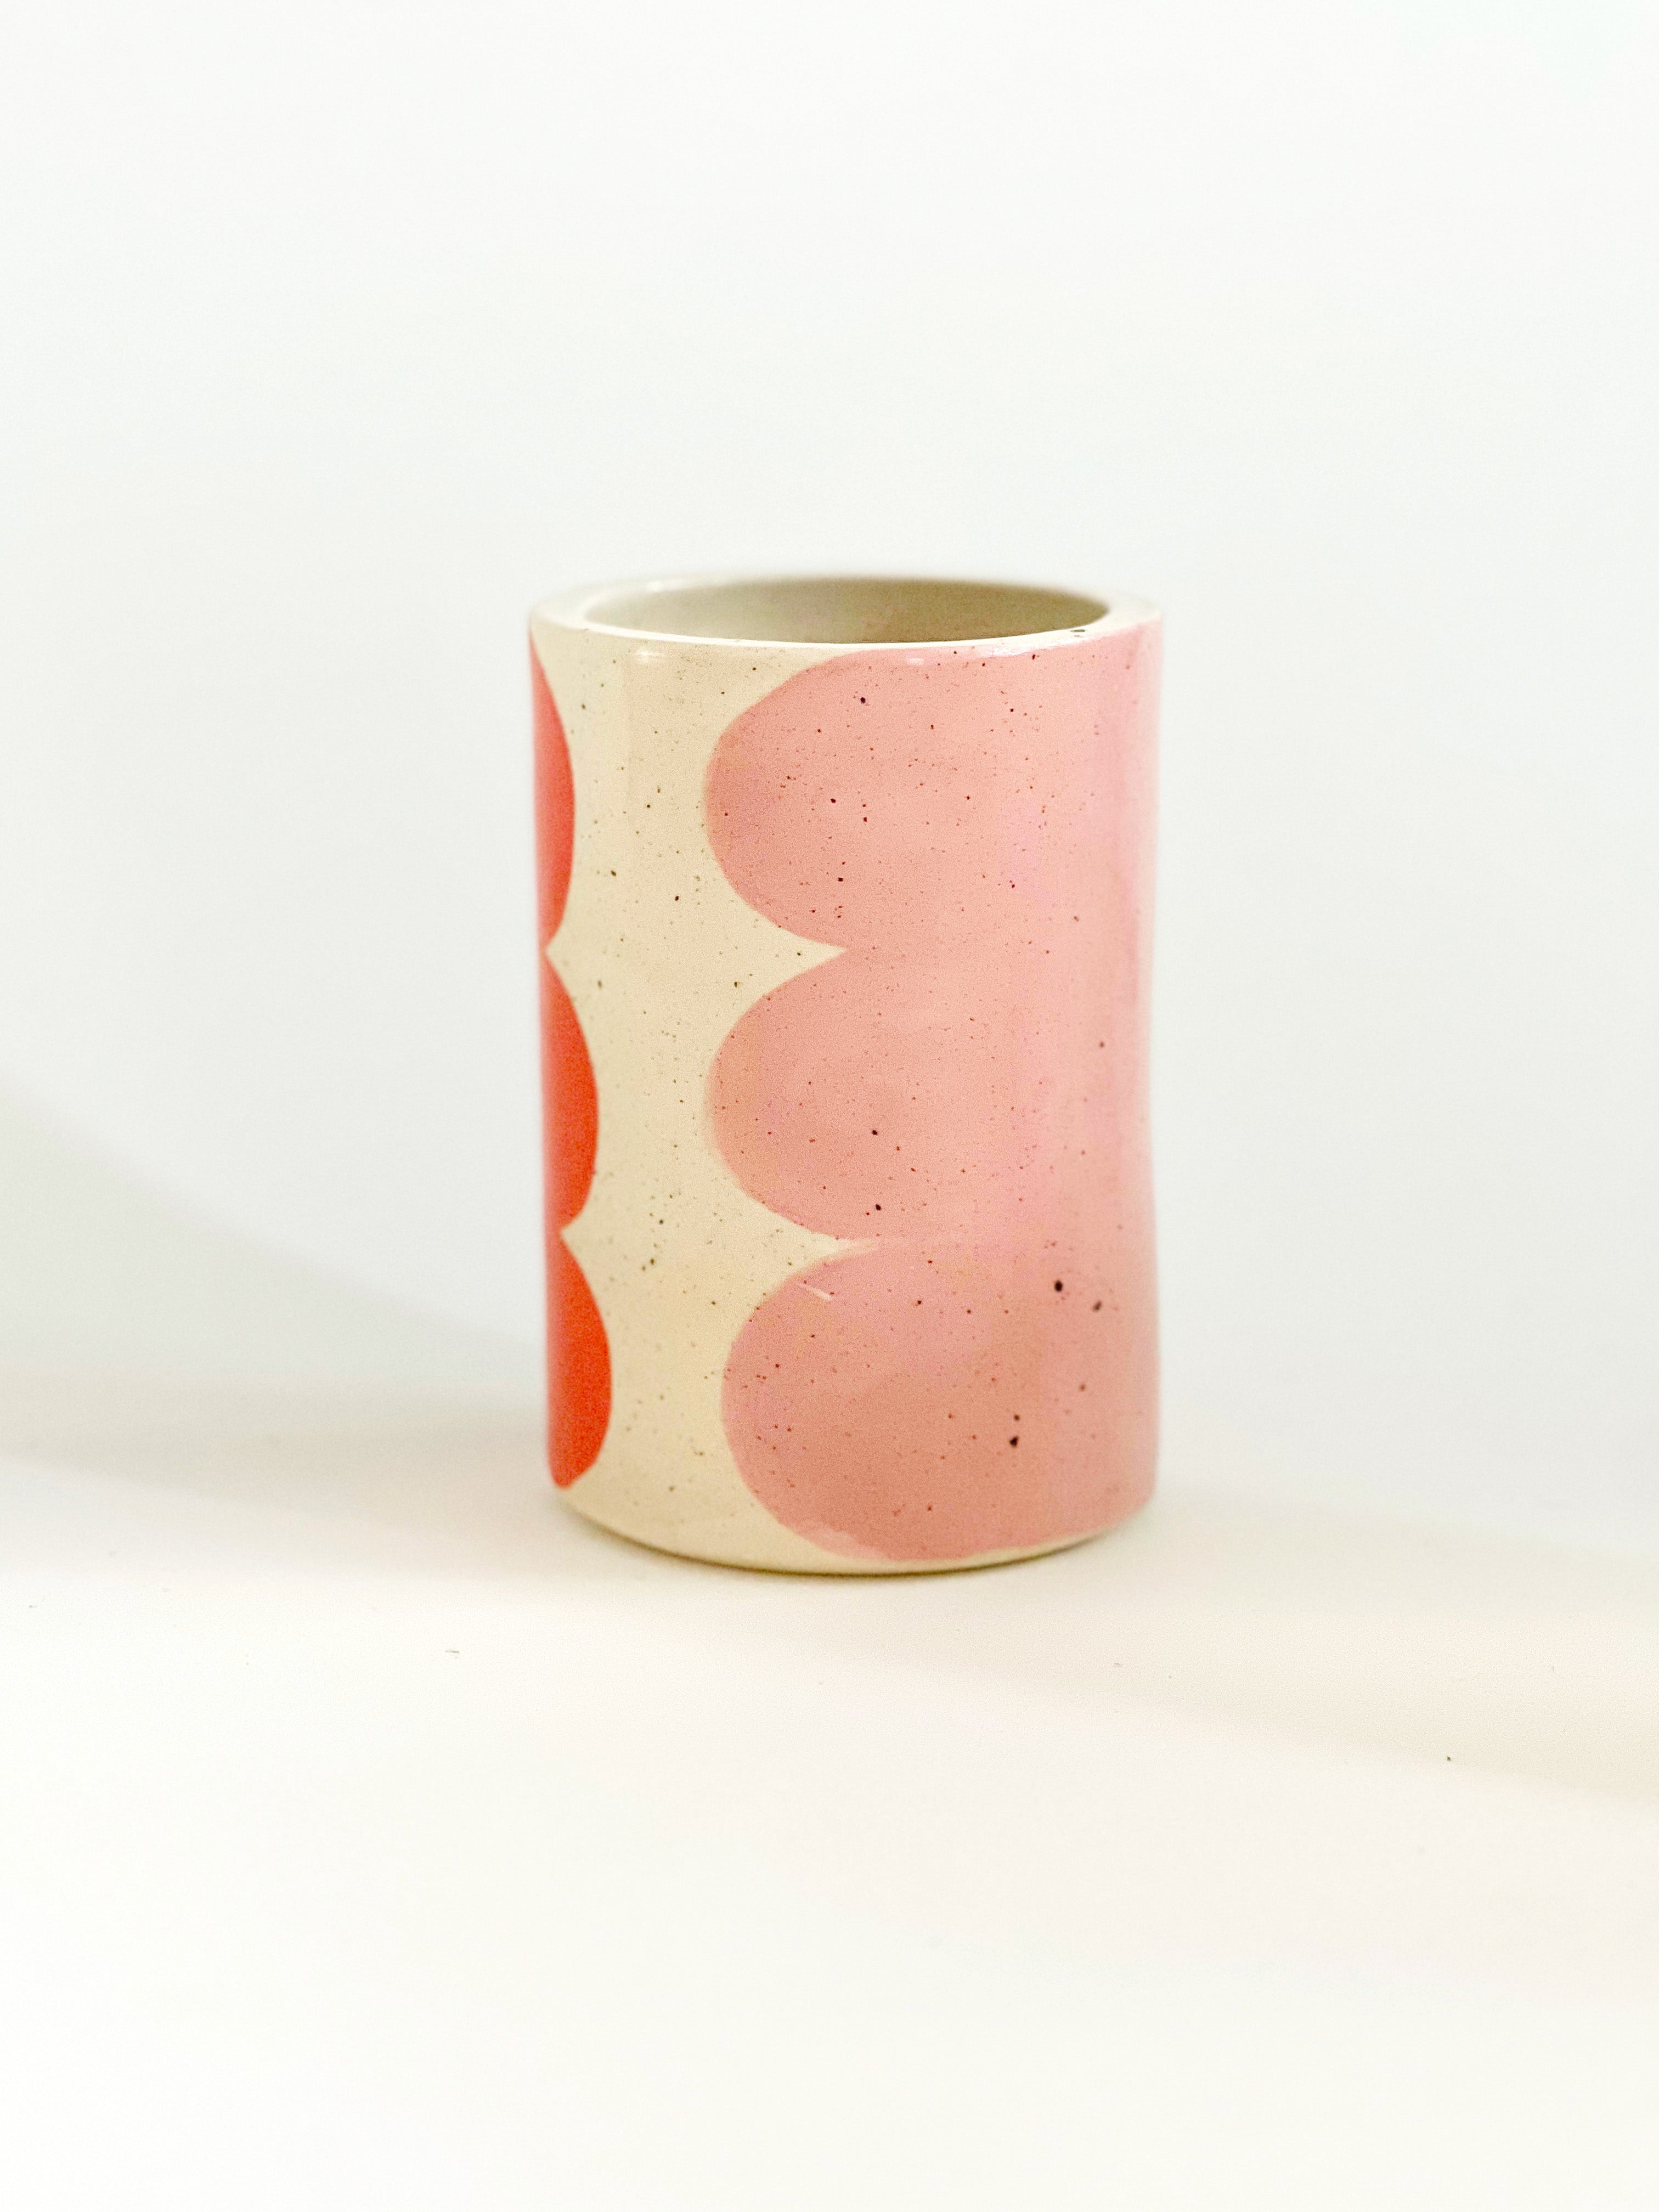 Playful hand-painted Vase